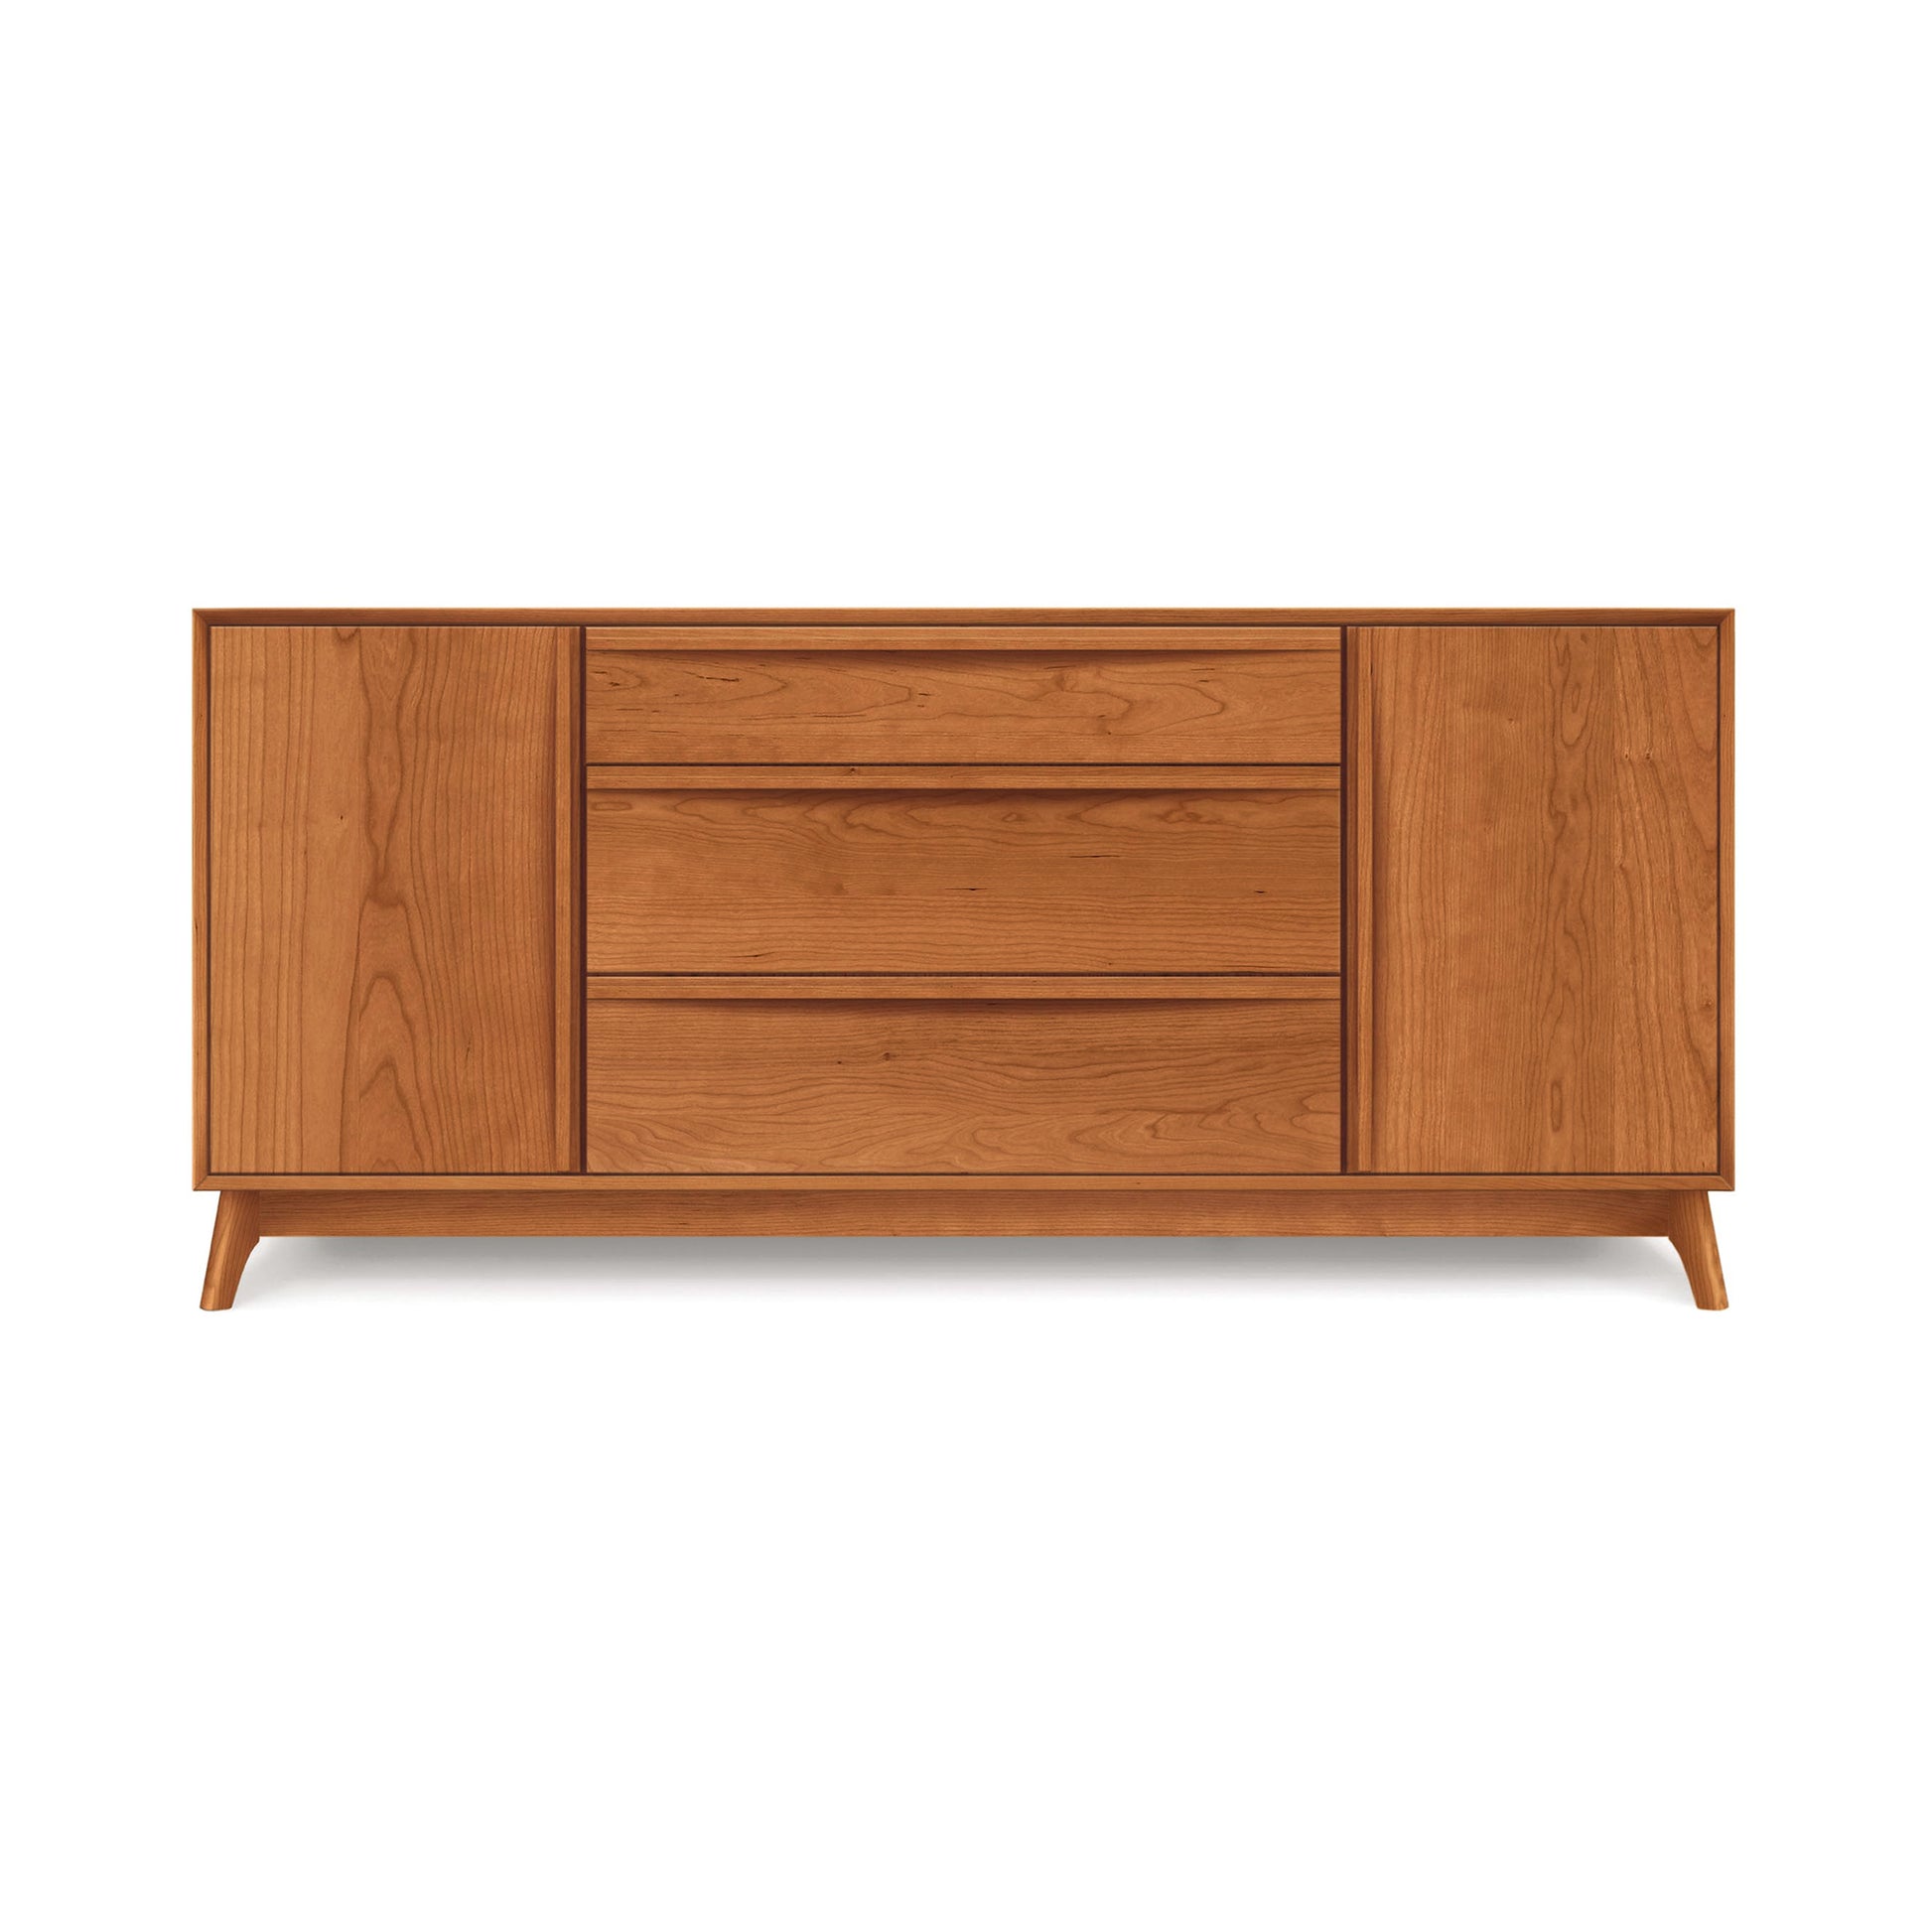 A luxury mid-century modern Catalina 3-Drawers, 2-Door Buffet with sliding doors and tapered legs against a white background. Brand Name: Copeland Furniture.